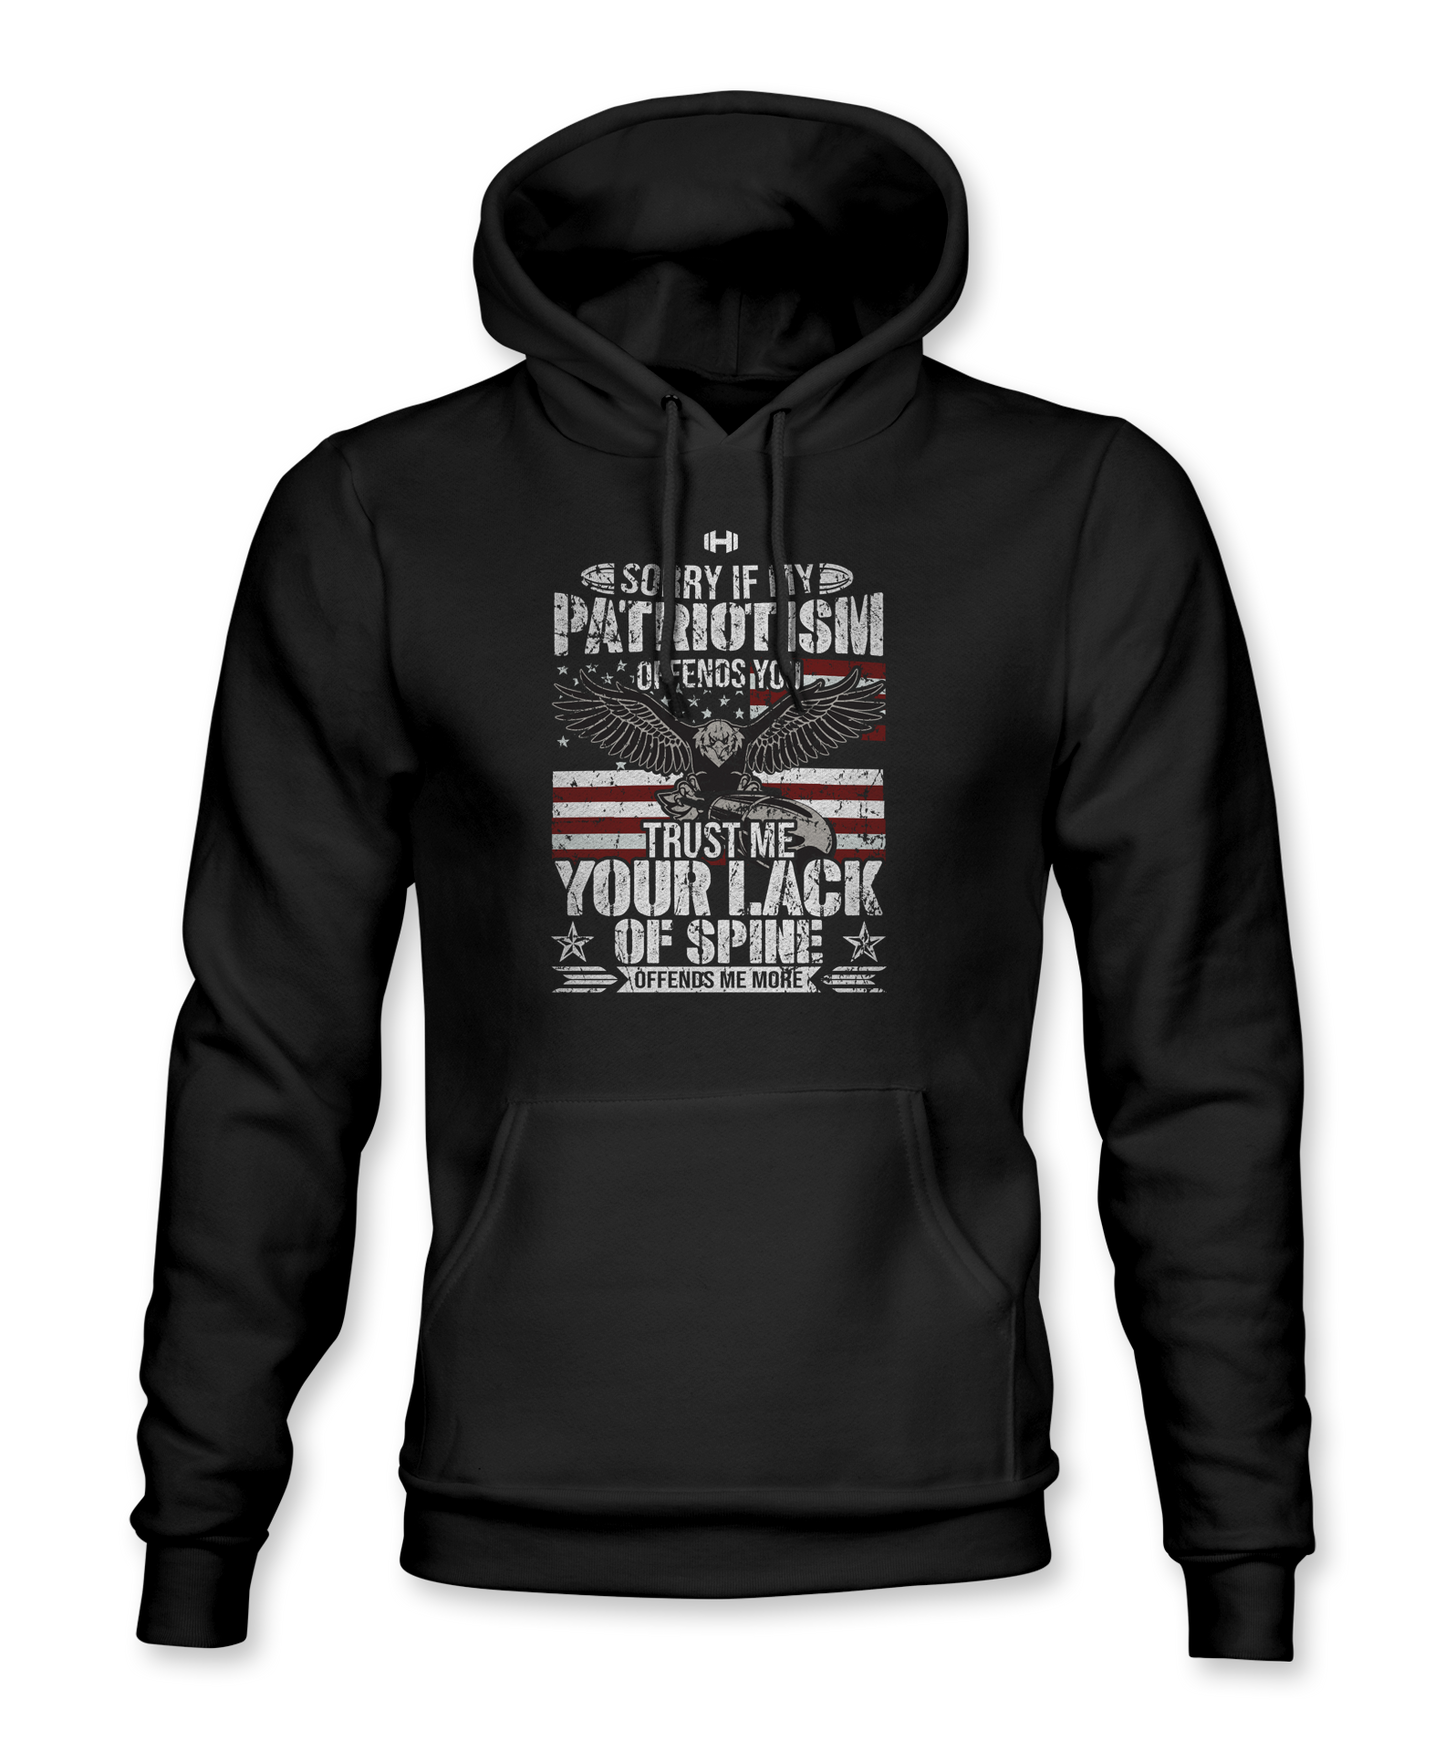 Sorry If My Patriotism Offends You Hoodie